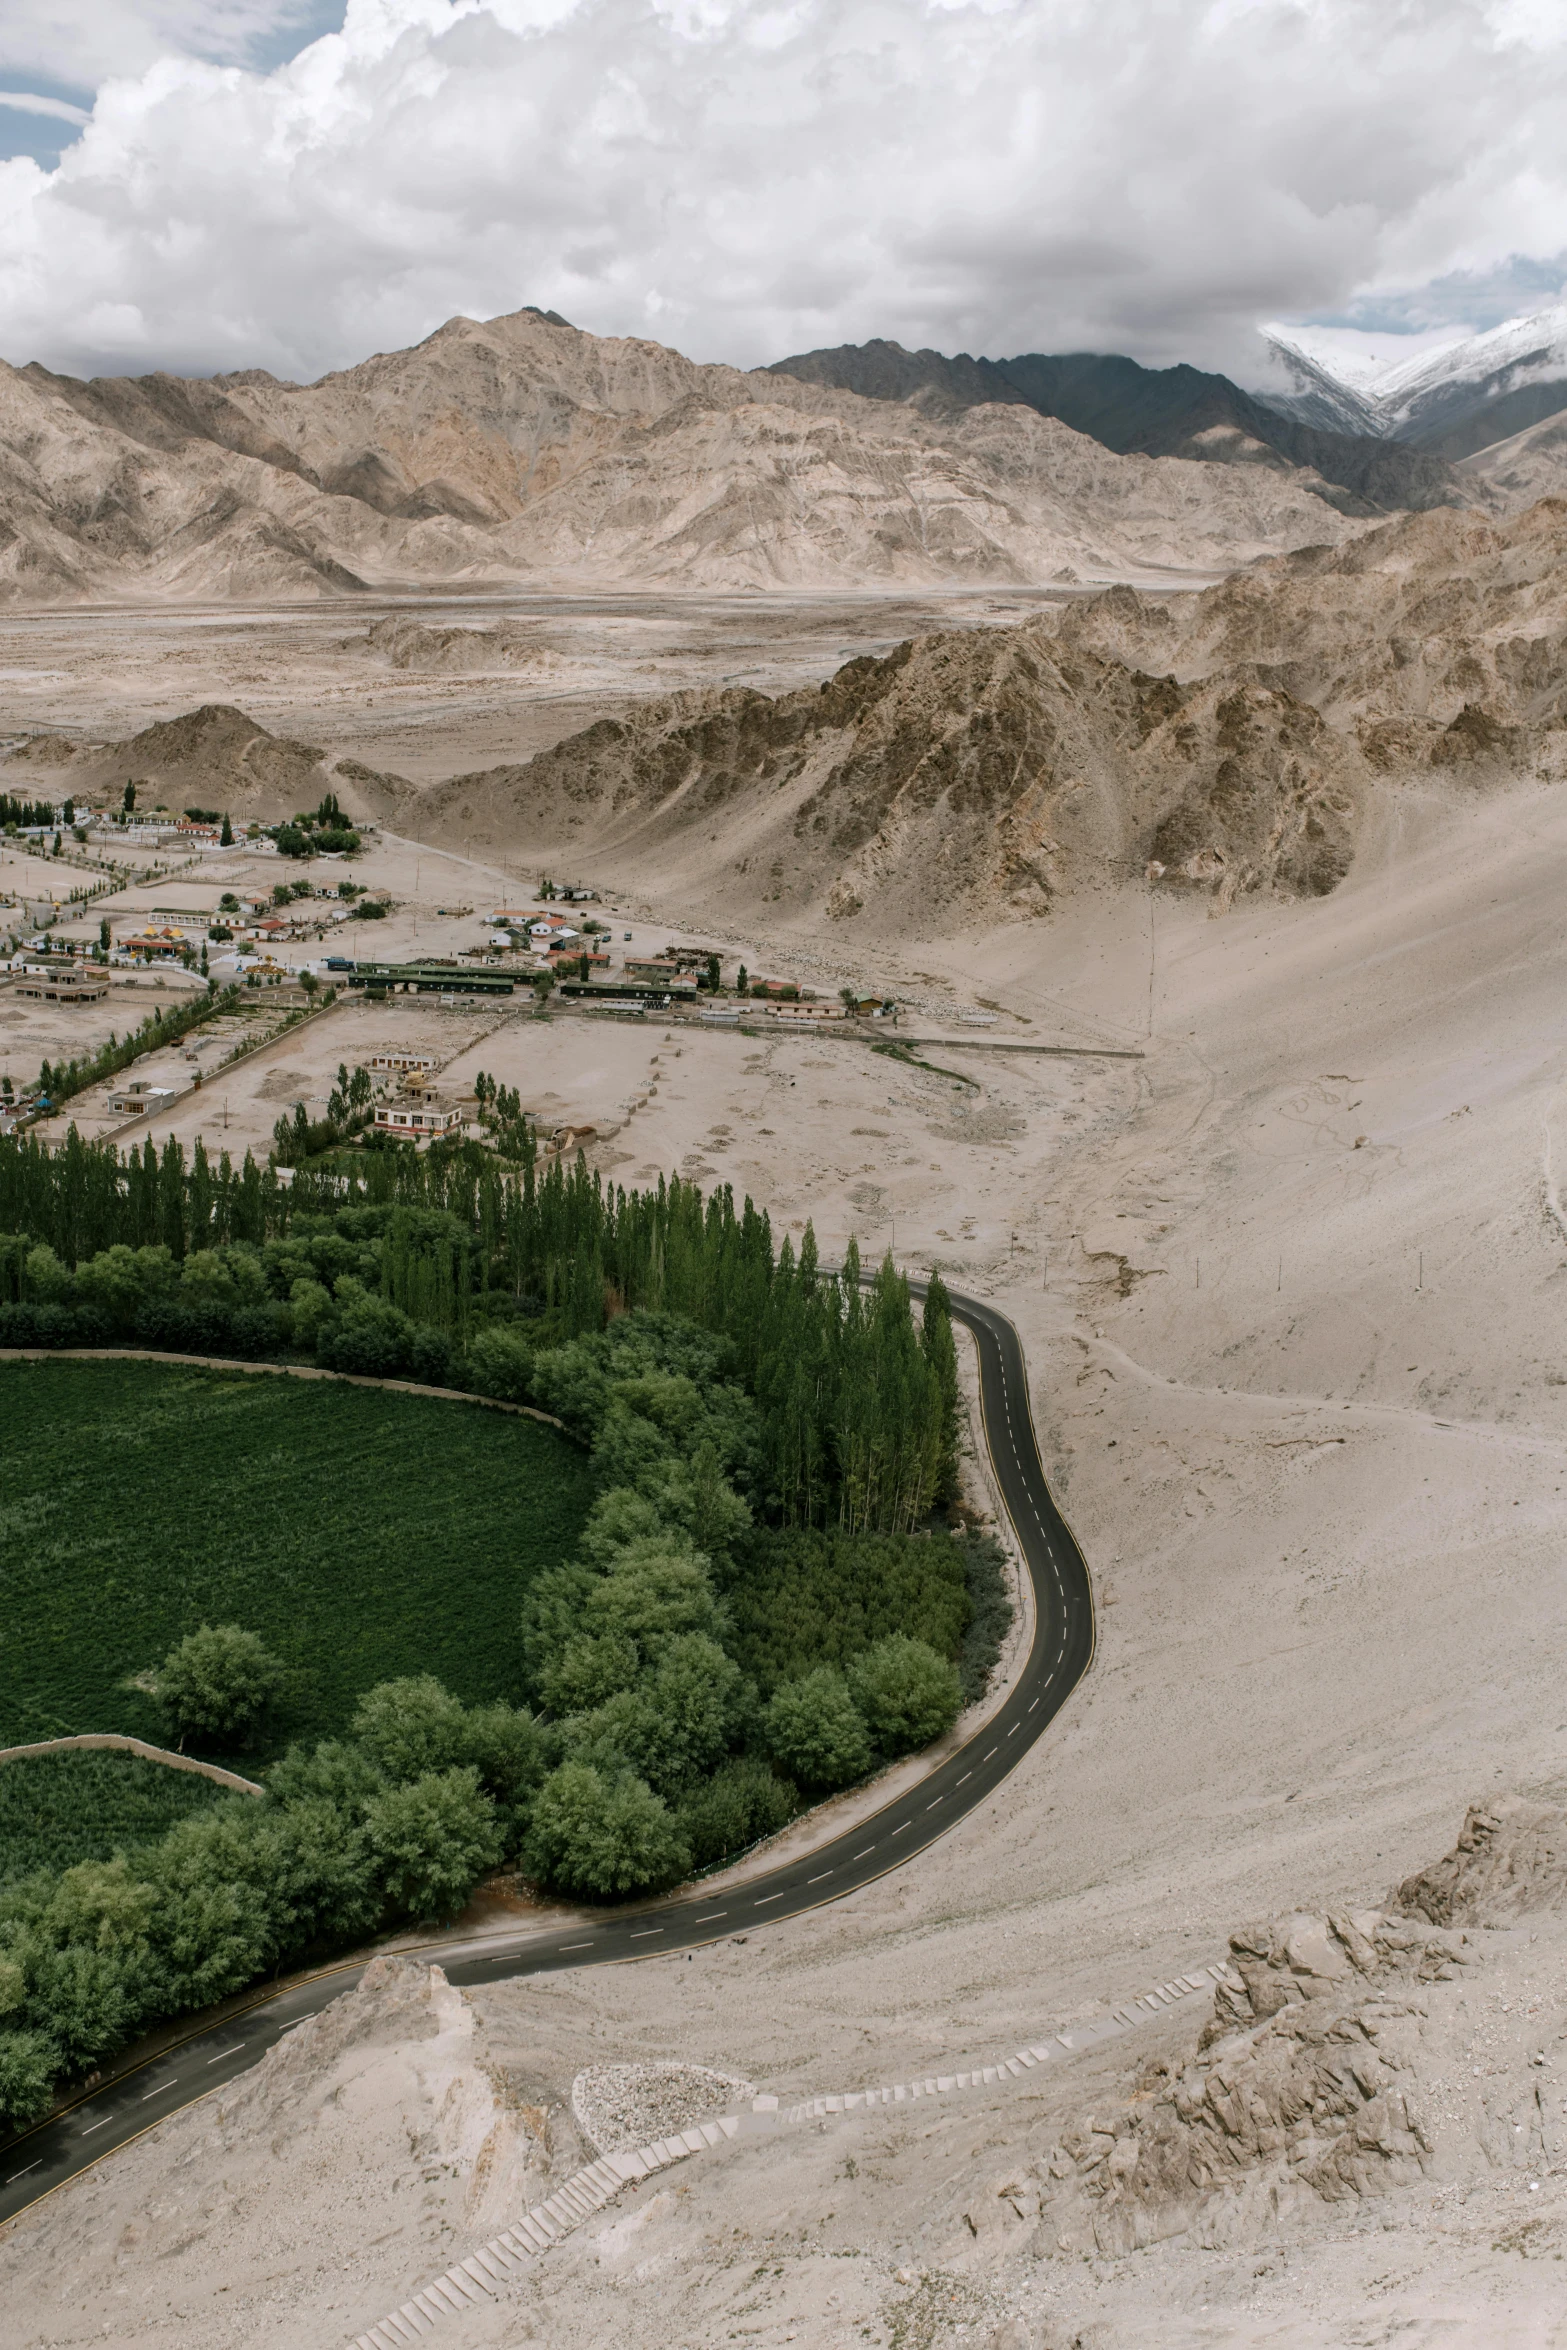 a river running through a lush green valley, inspired by Steve McCurry, trending on unsplash, land art, sand storm, houses and roads, tibet, high detail photo of a deserted